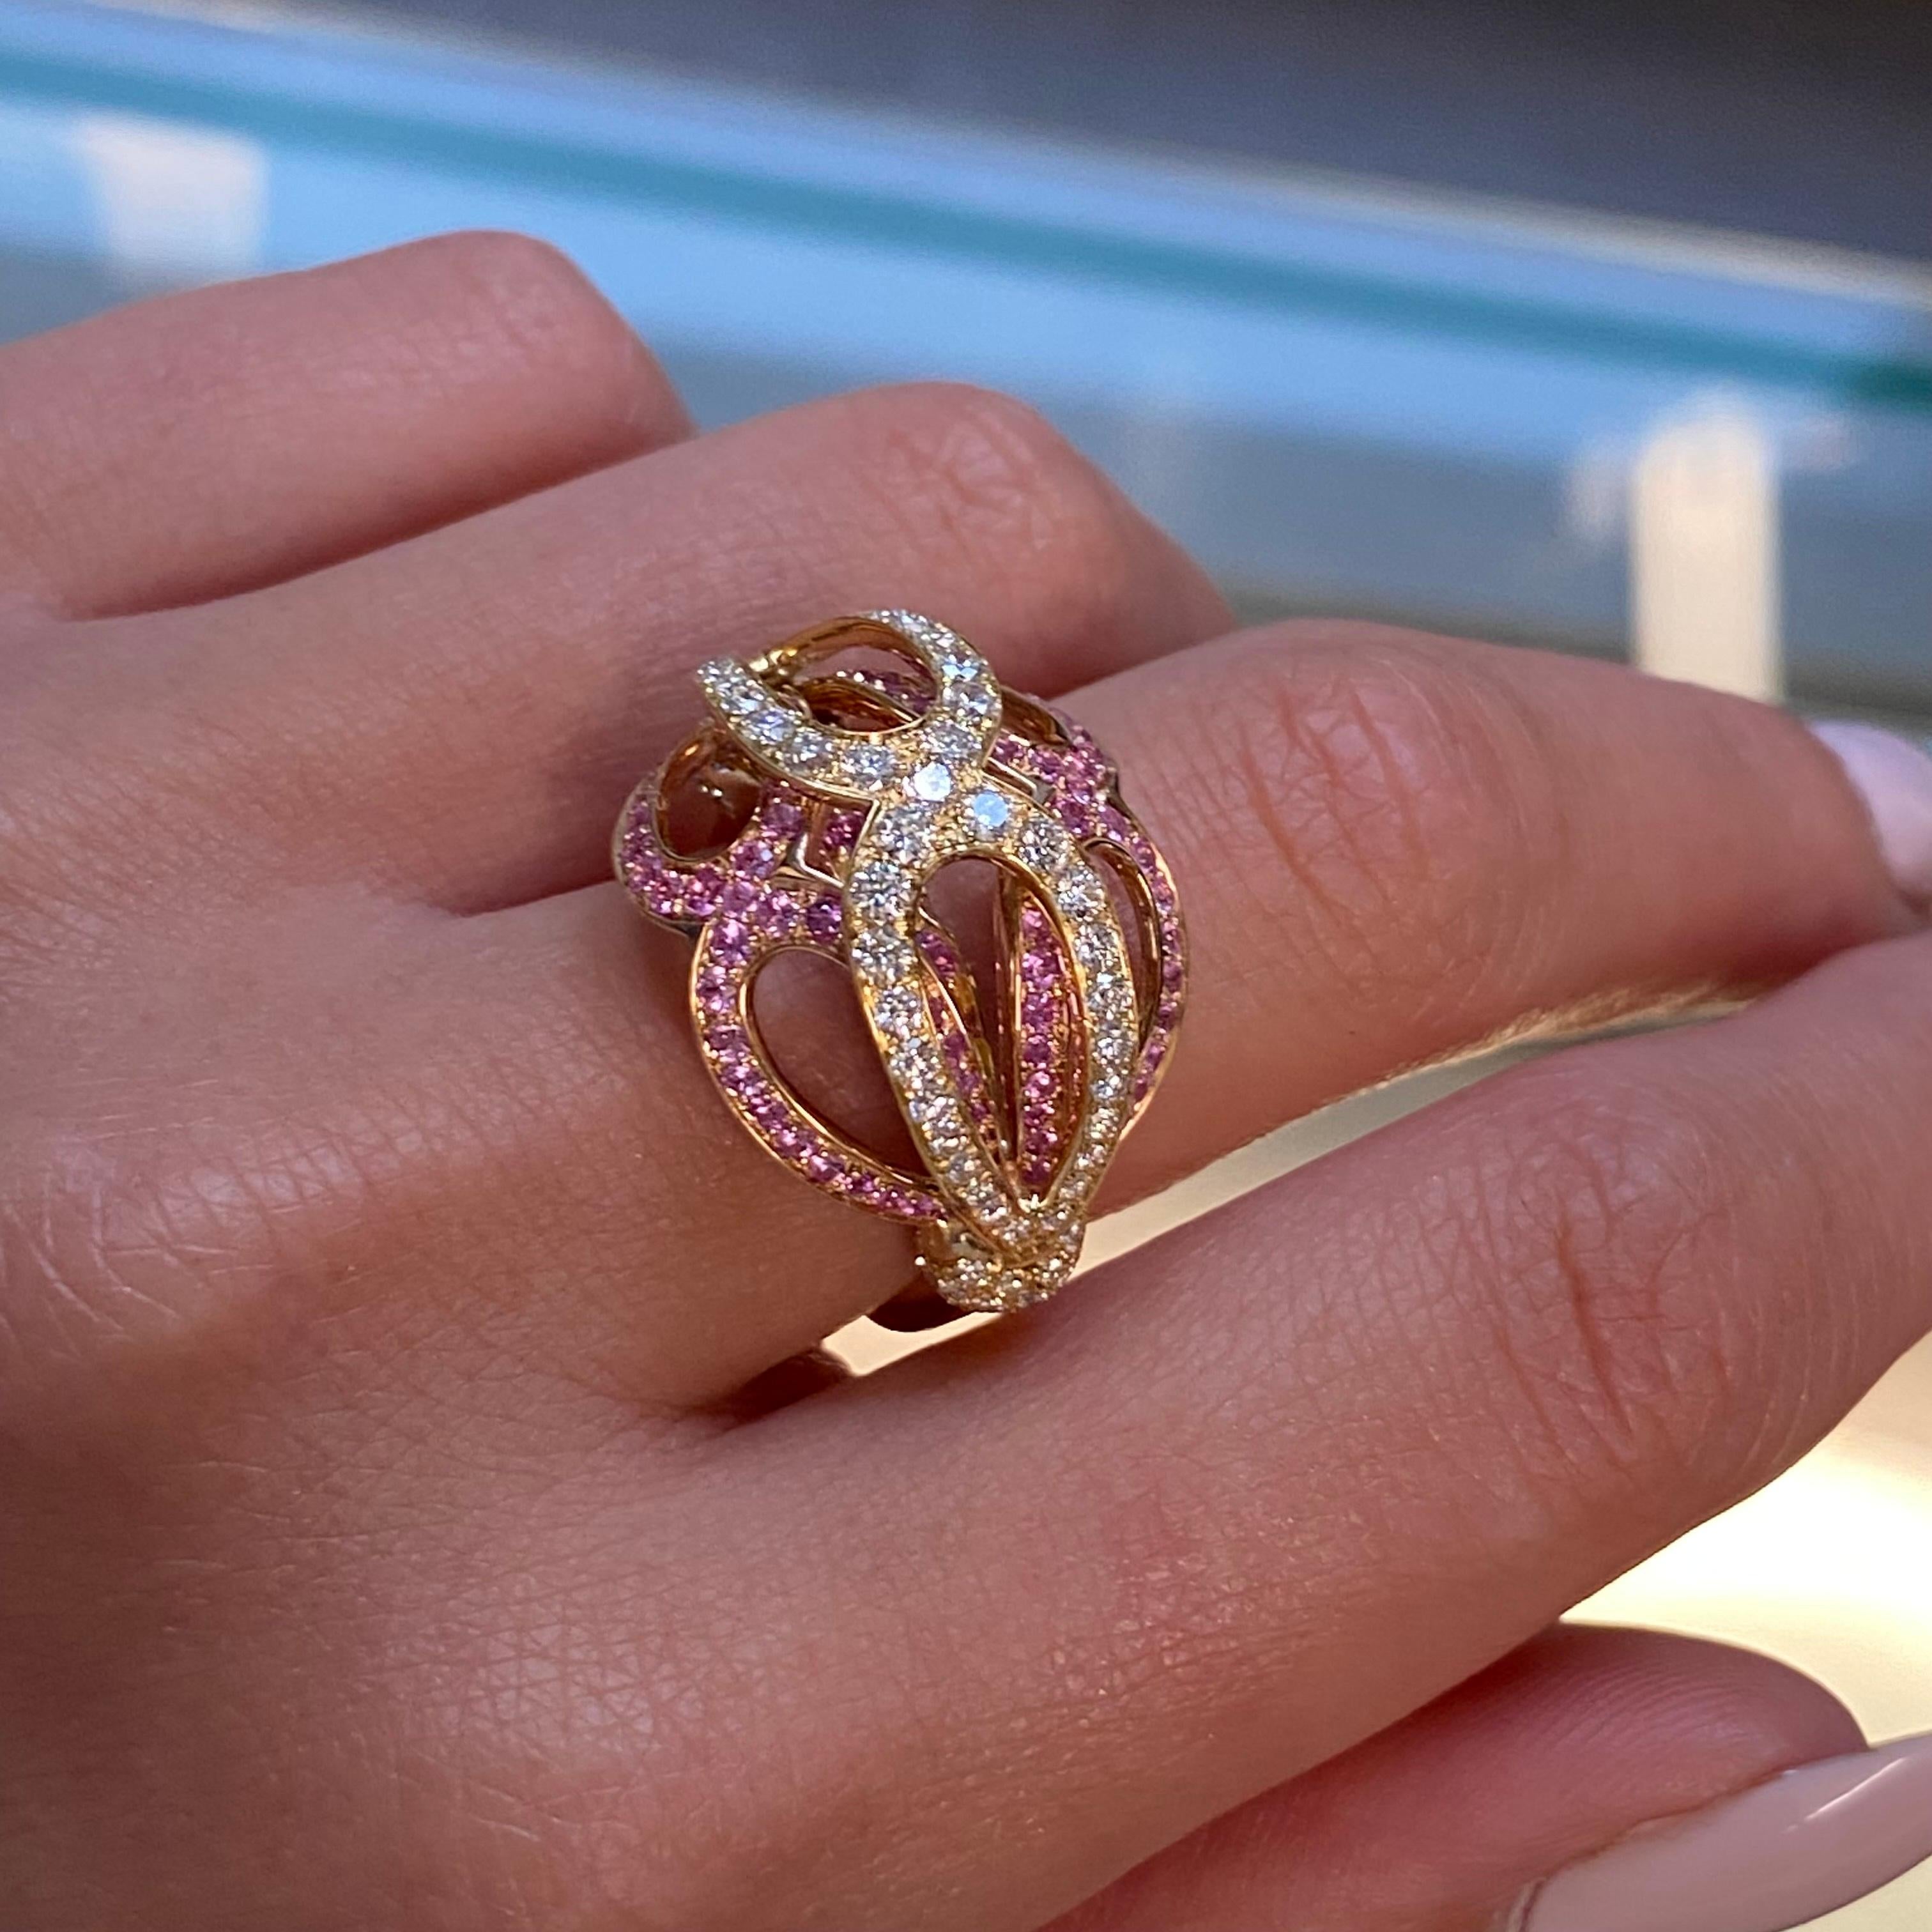 Luca Carati Diamond & Pink Sapphire Cocktail Ring 18K Yellow Gold 1.06Cttw In New Condition For Sale In New York, NY